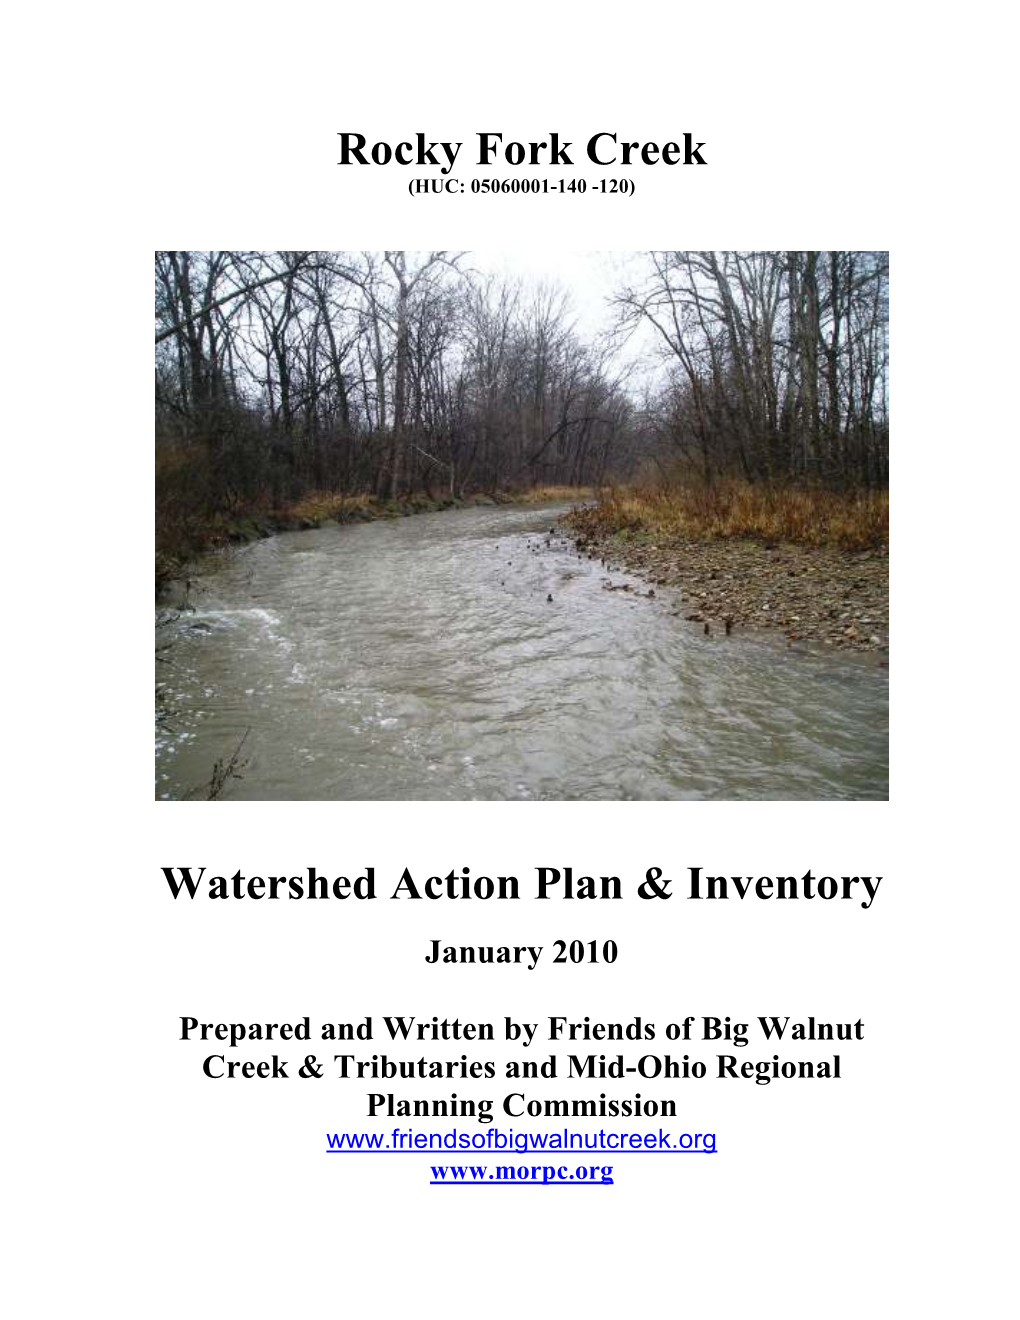 Rocky Fork Creek Watershed Action Plan & Inventory